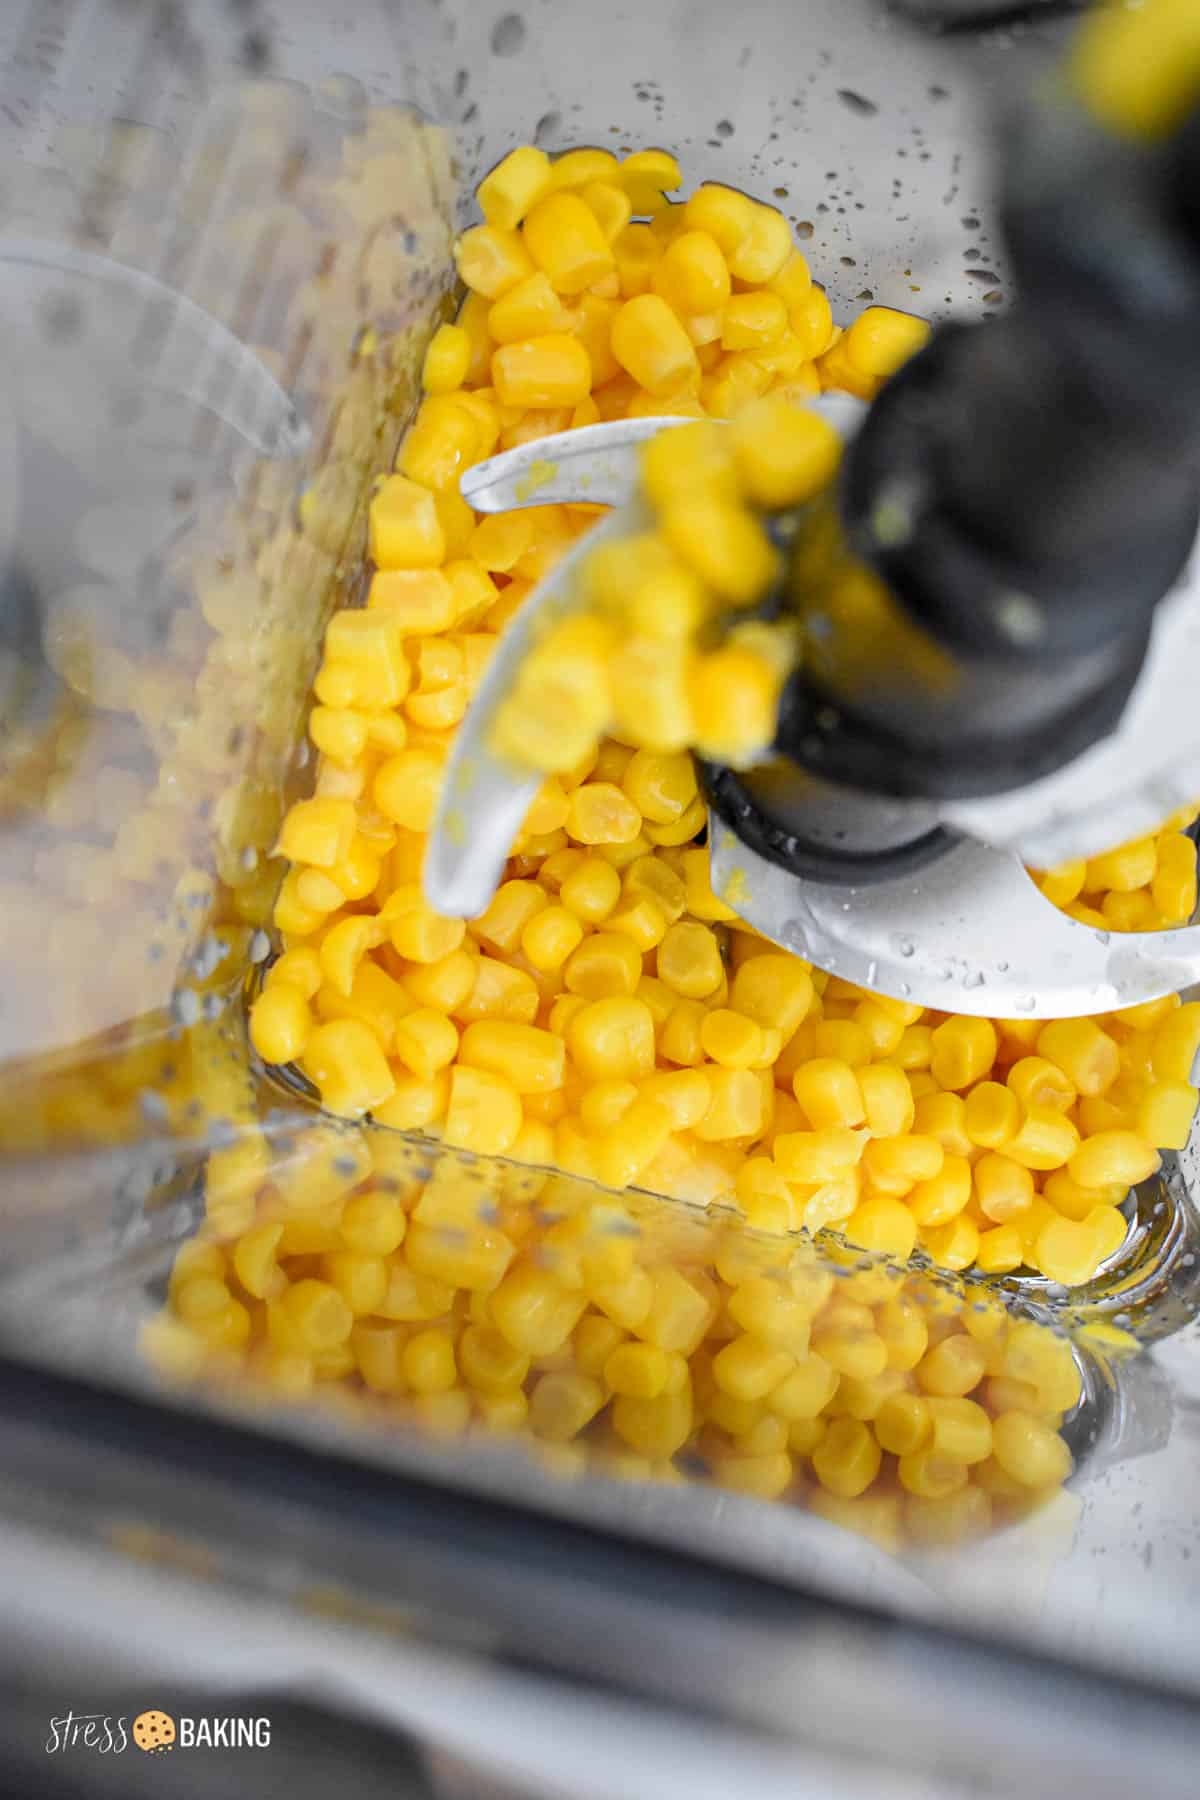 Bright yellow corn kernels in a blender